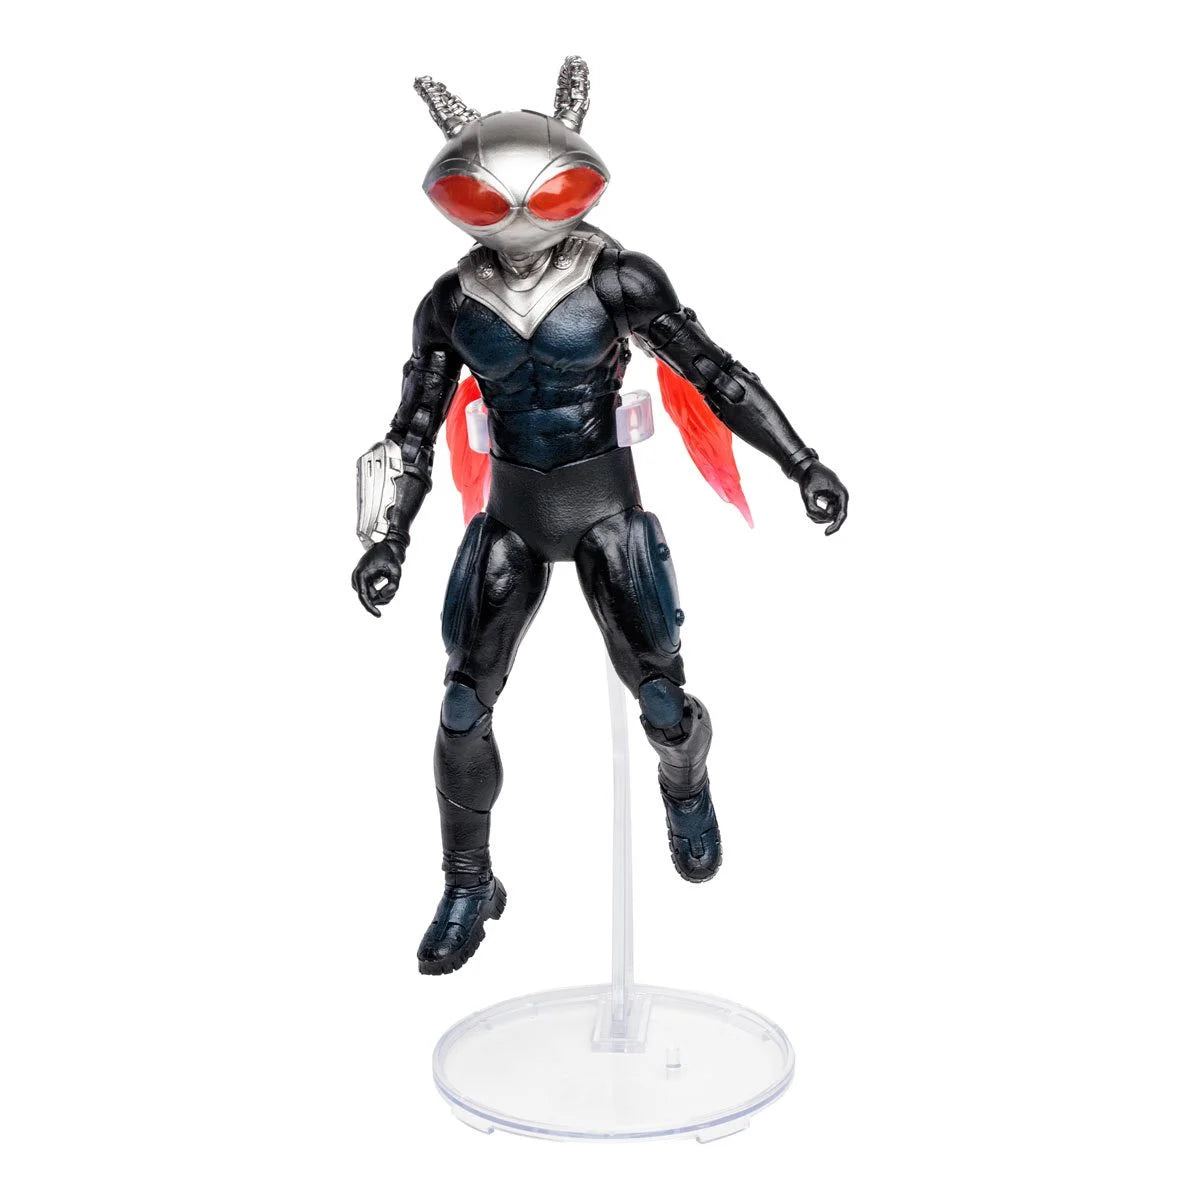 DC Multiverse Aquaman and the Lost Kingdom Movie Black Manta 7-Inch Scale Action Figure with stand